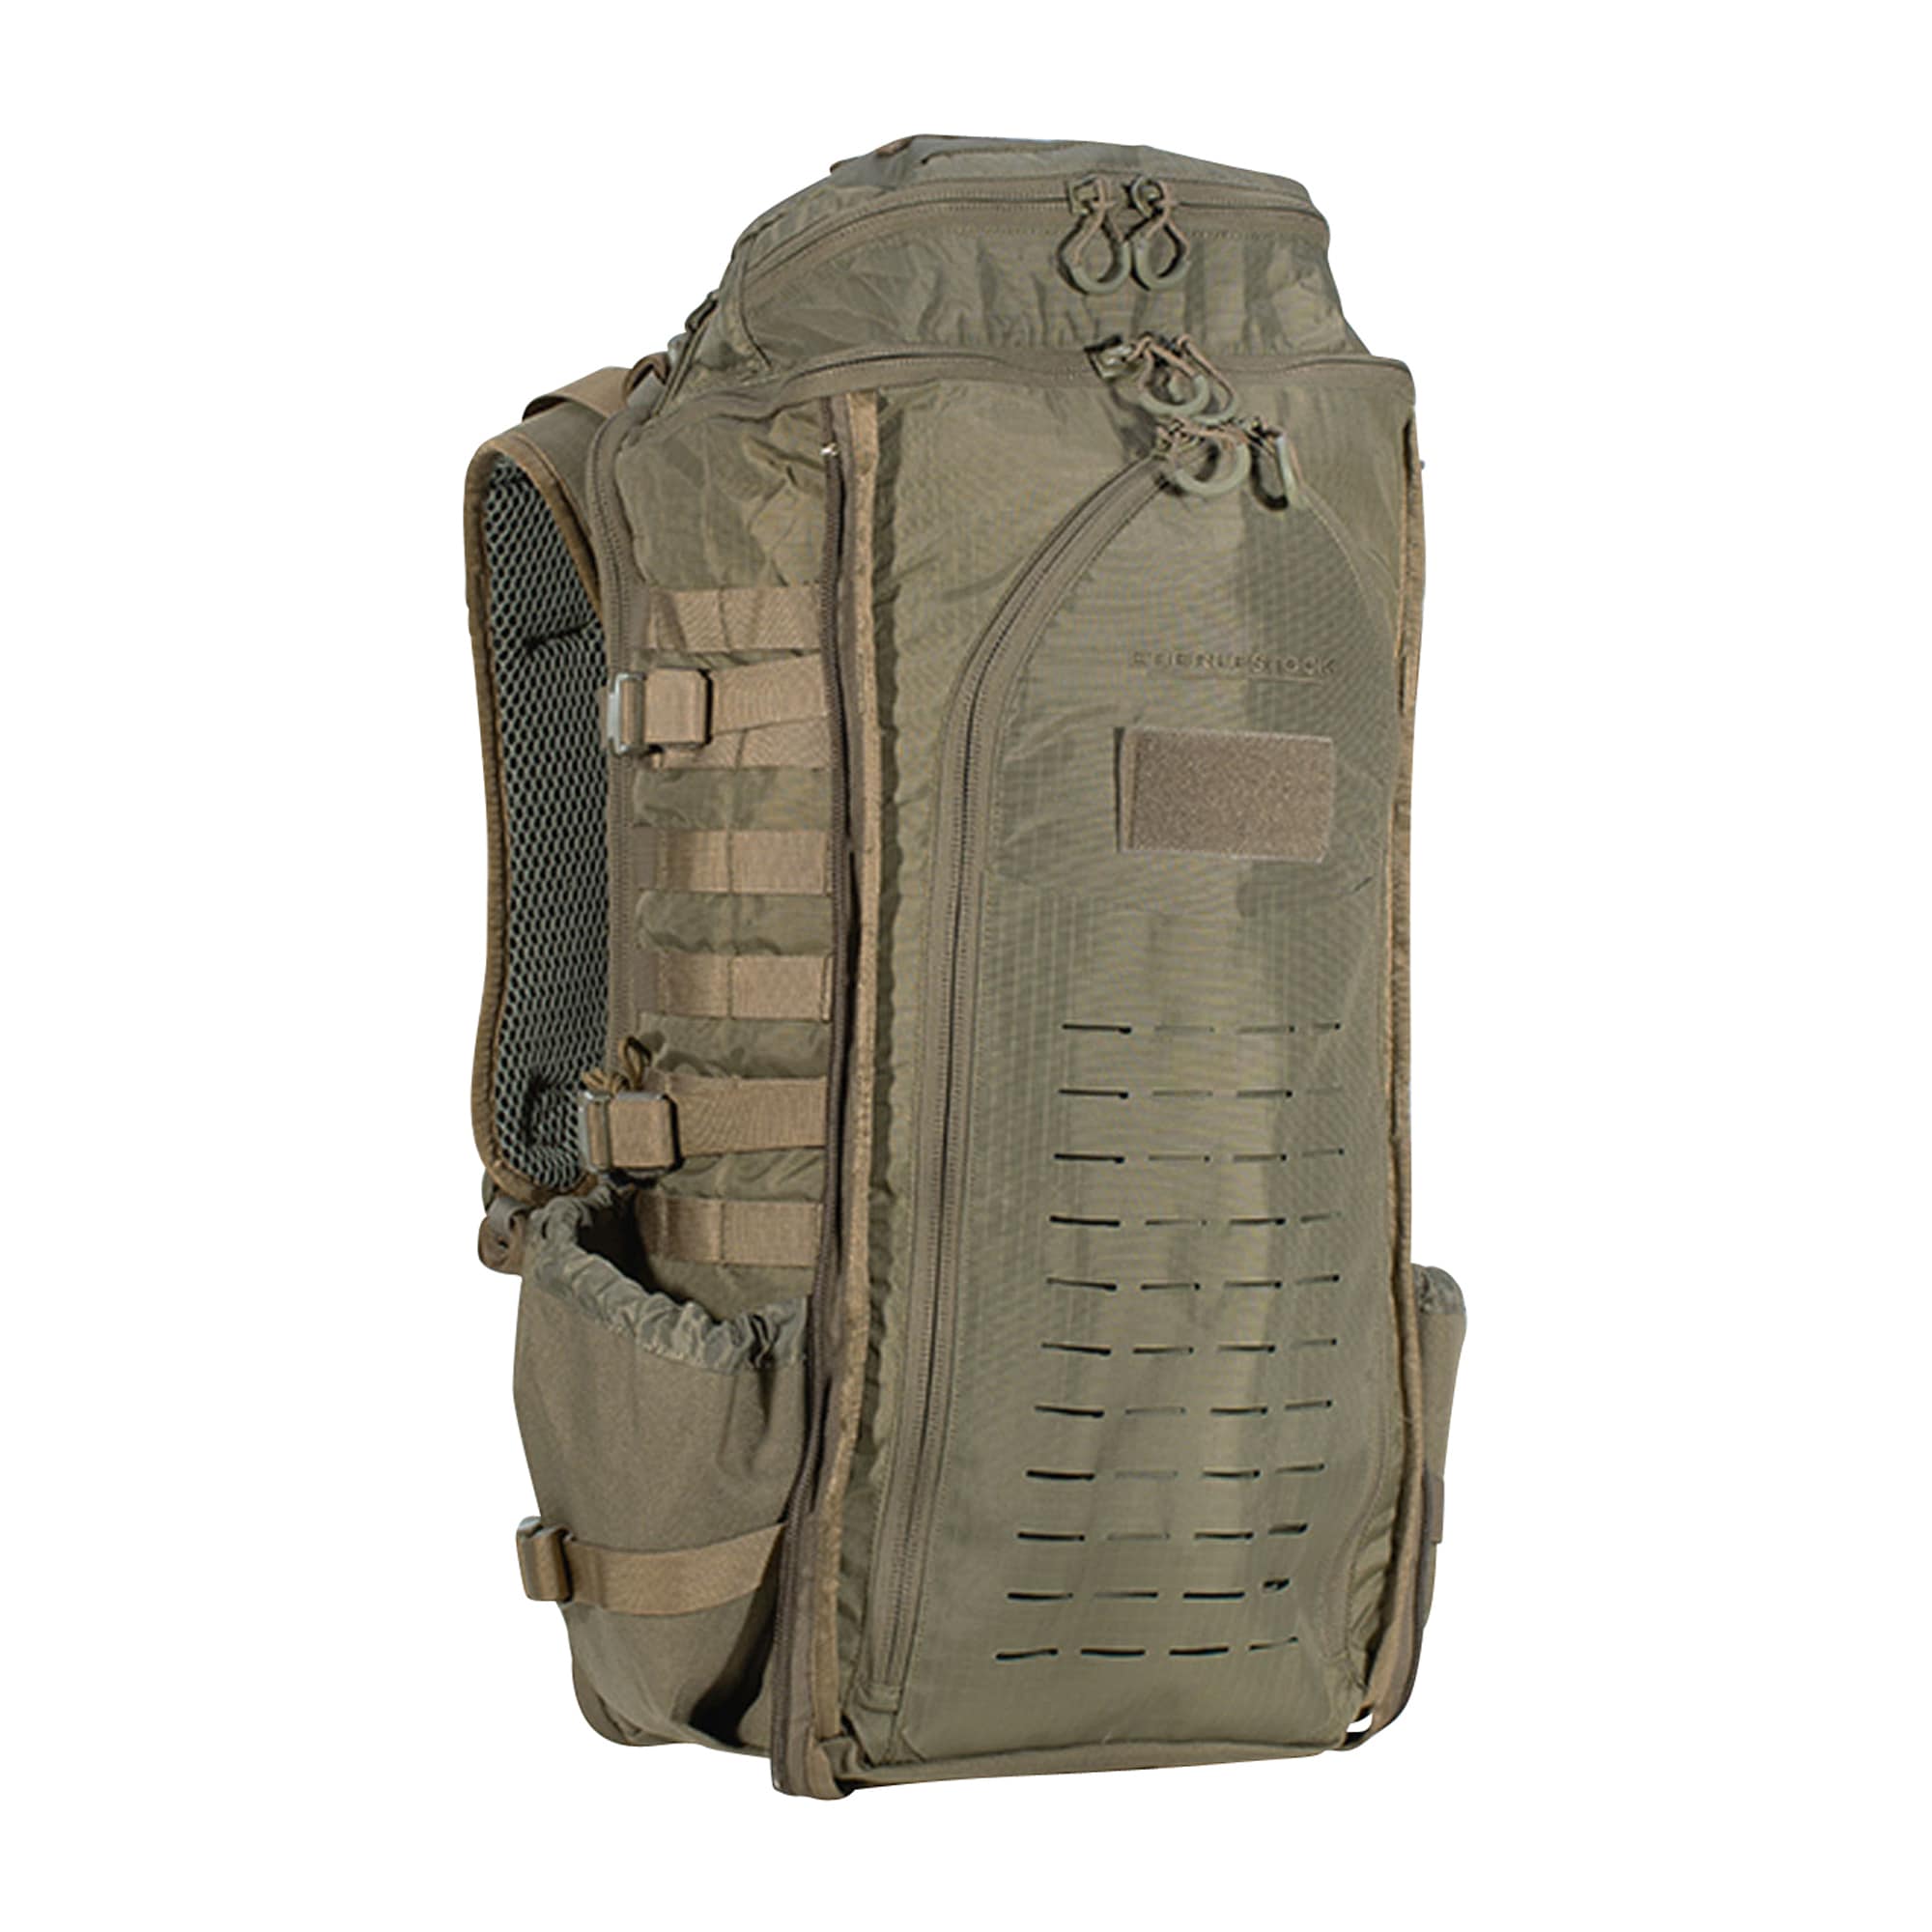 Purchase the Eberlestock Backpack Little Brother Pack military g